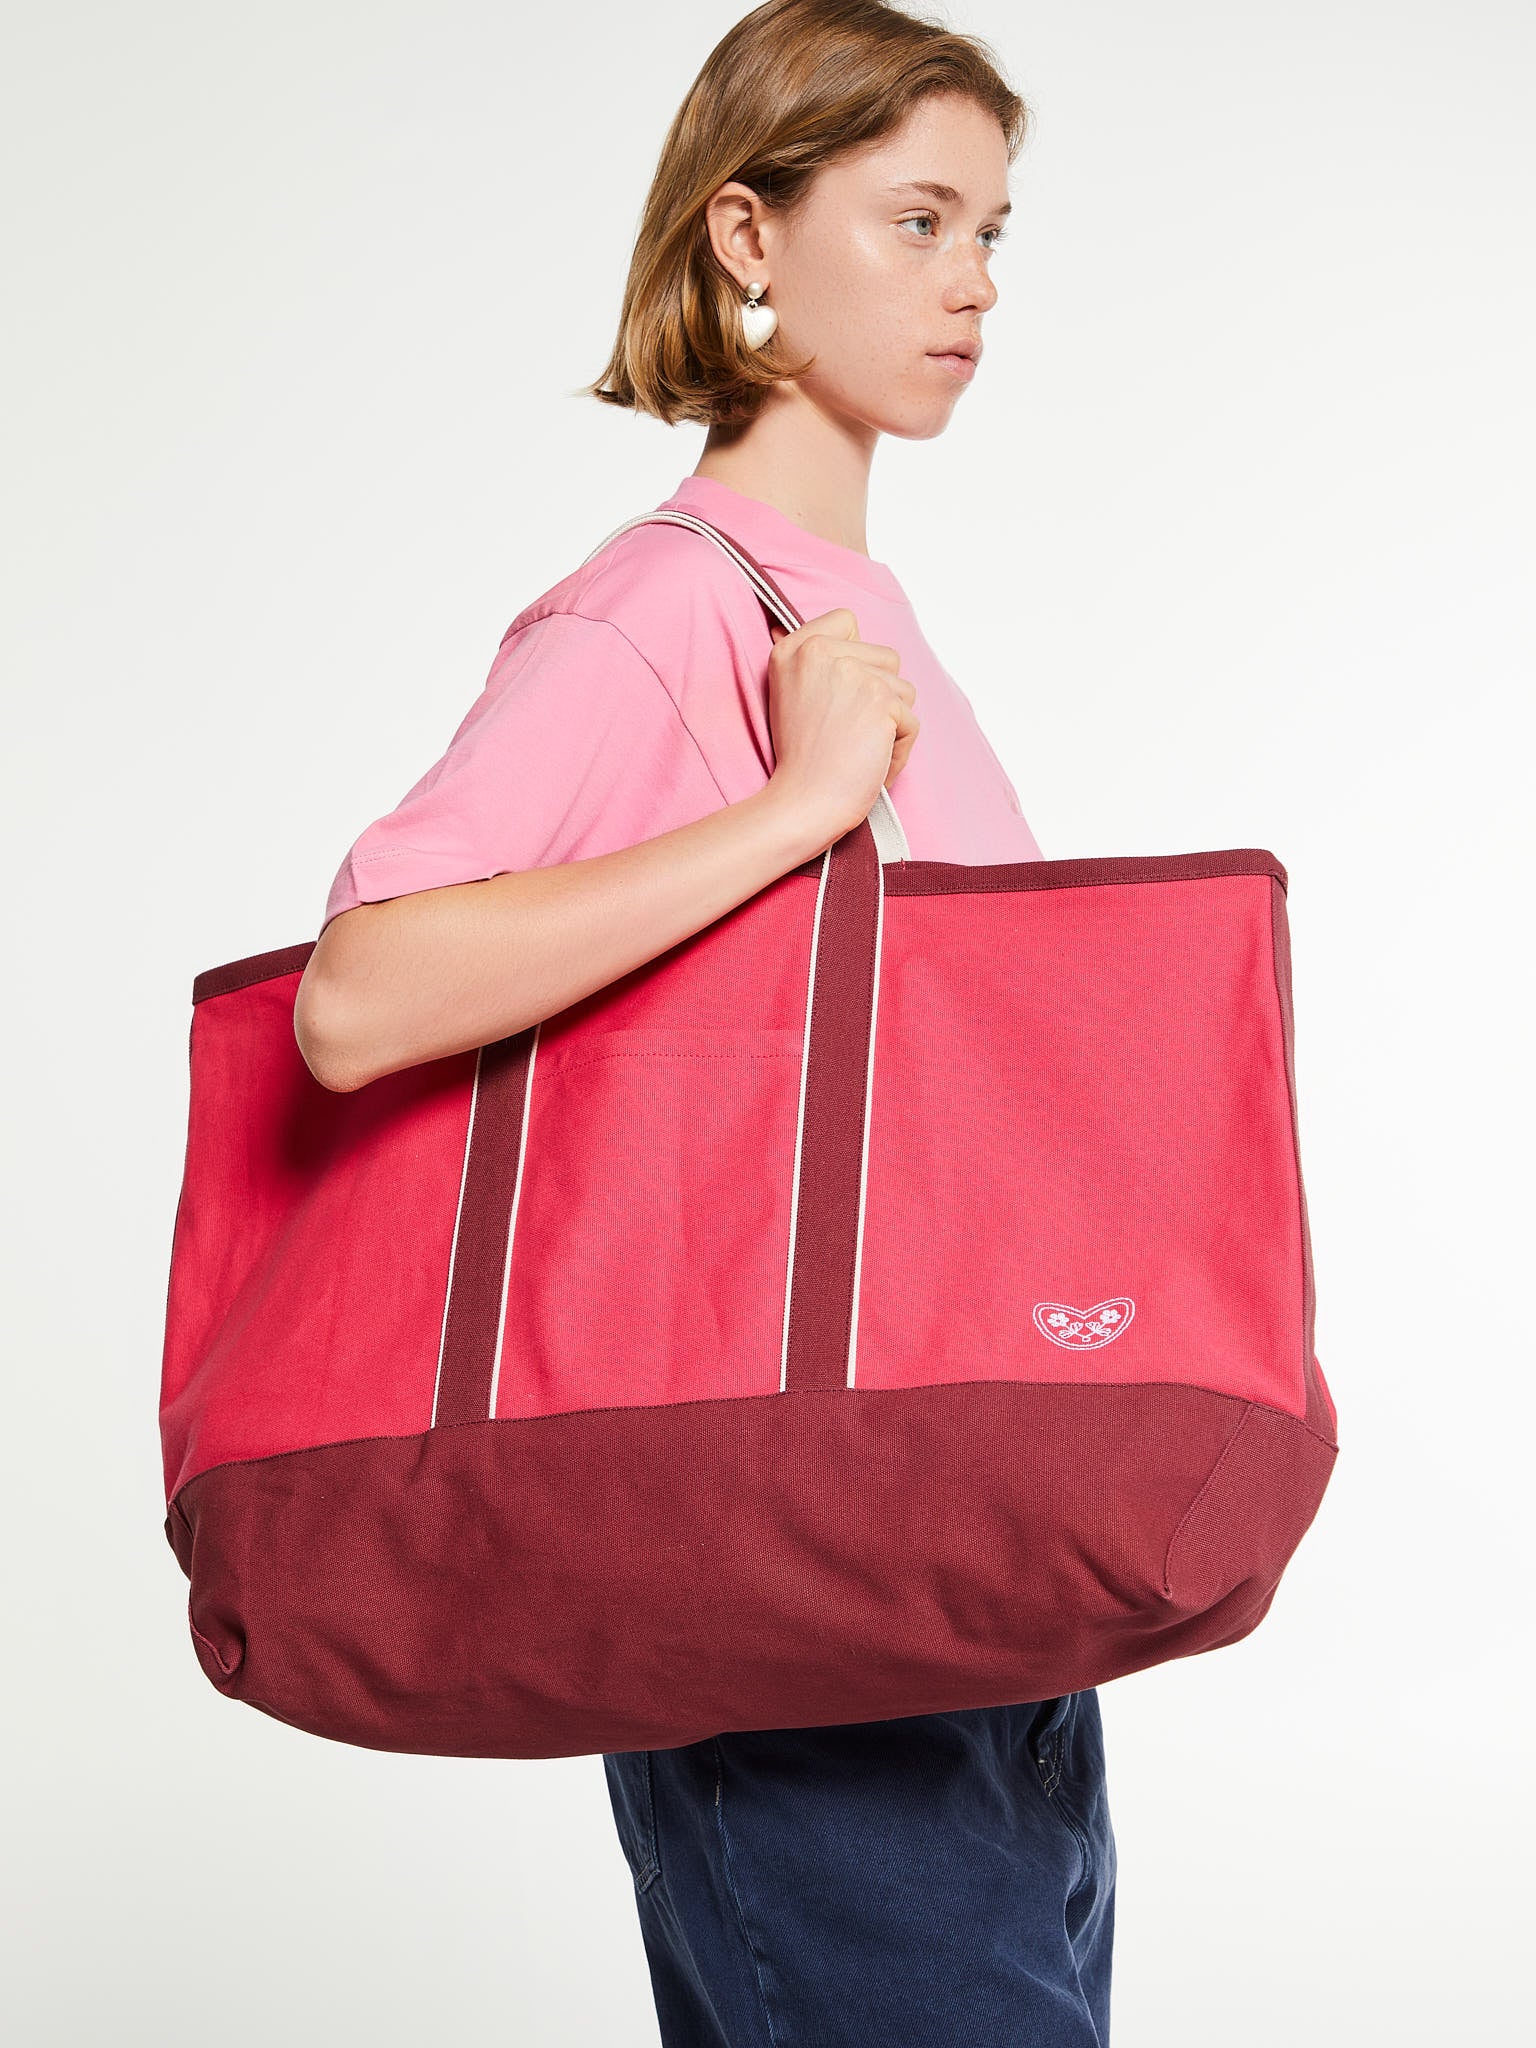 Easy Bag Large in Red and Burgundy